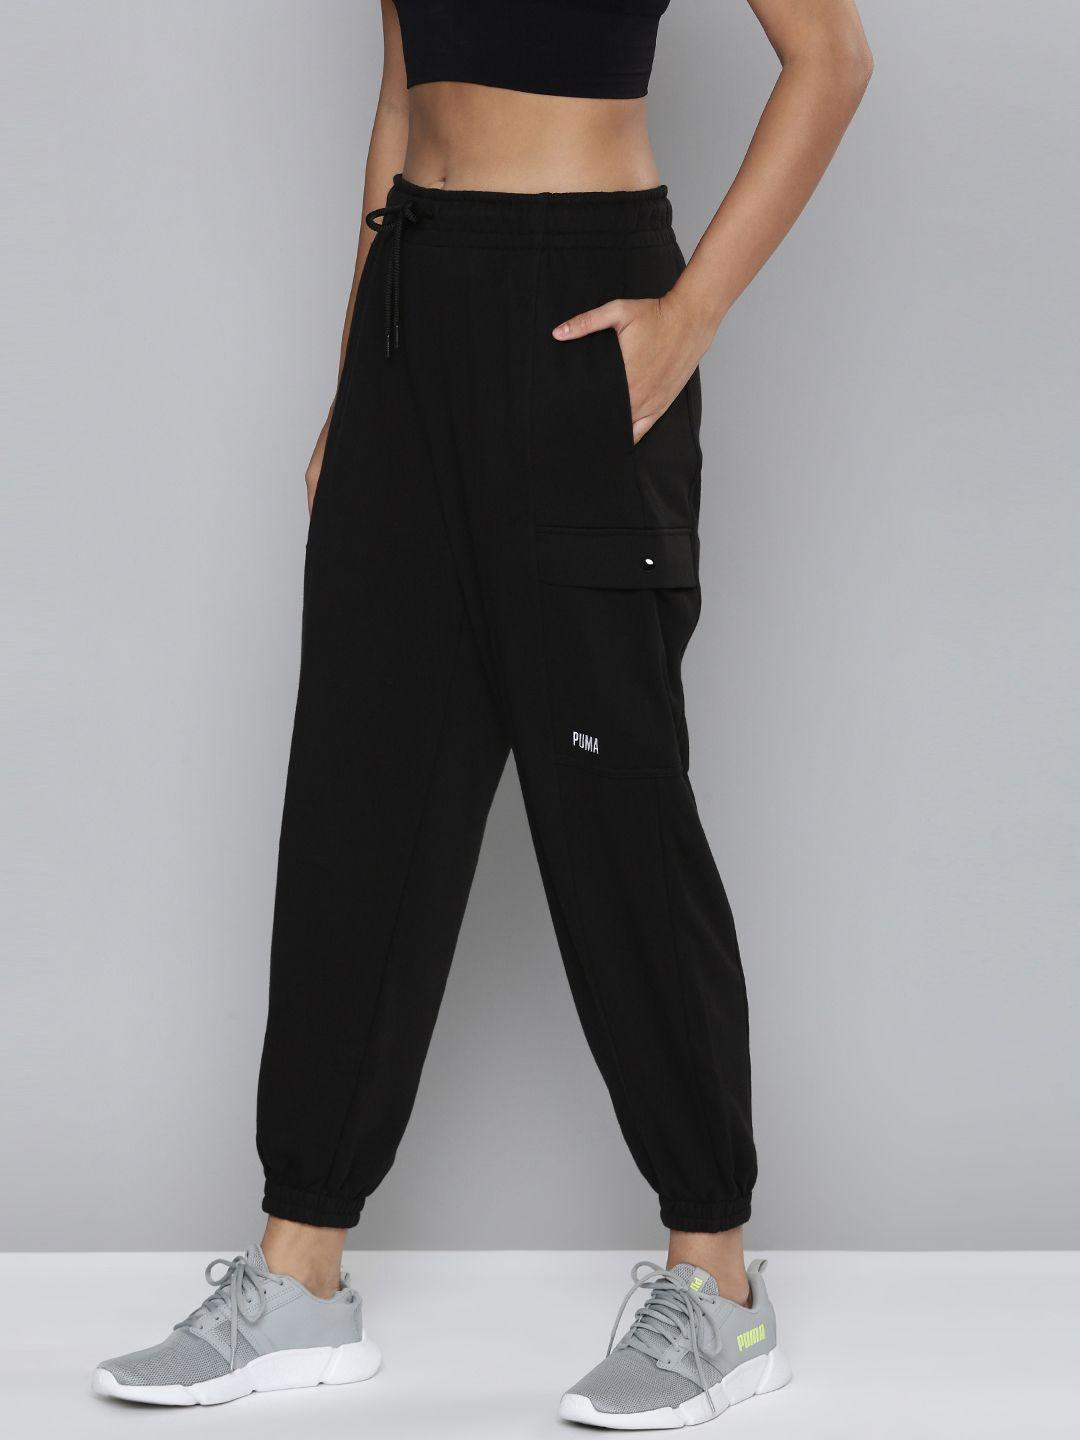 puma-women-black-brand-logo-printed-relaxed-fit-swxp-cargo-joggers